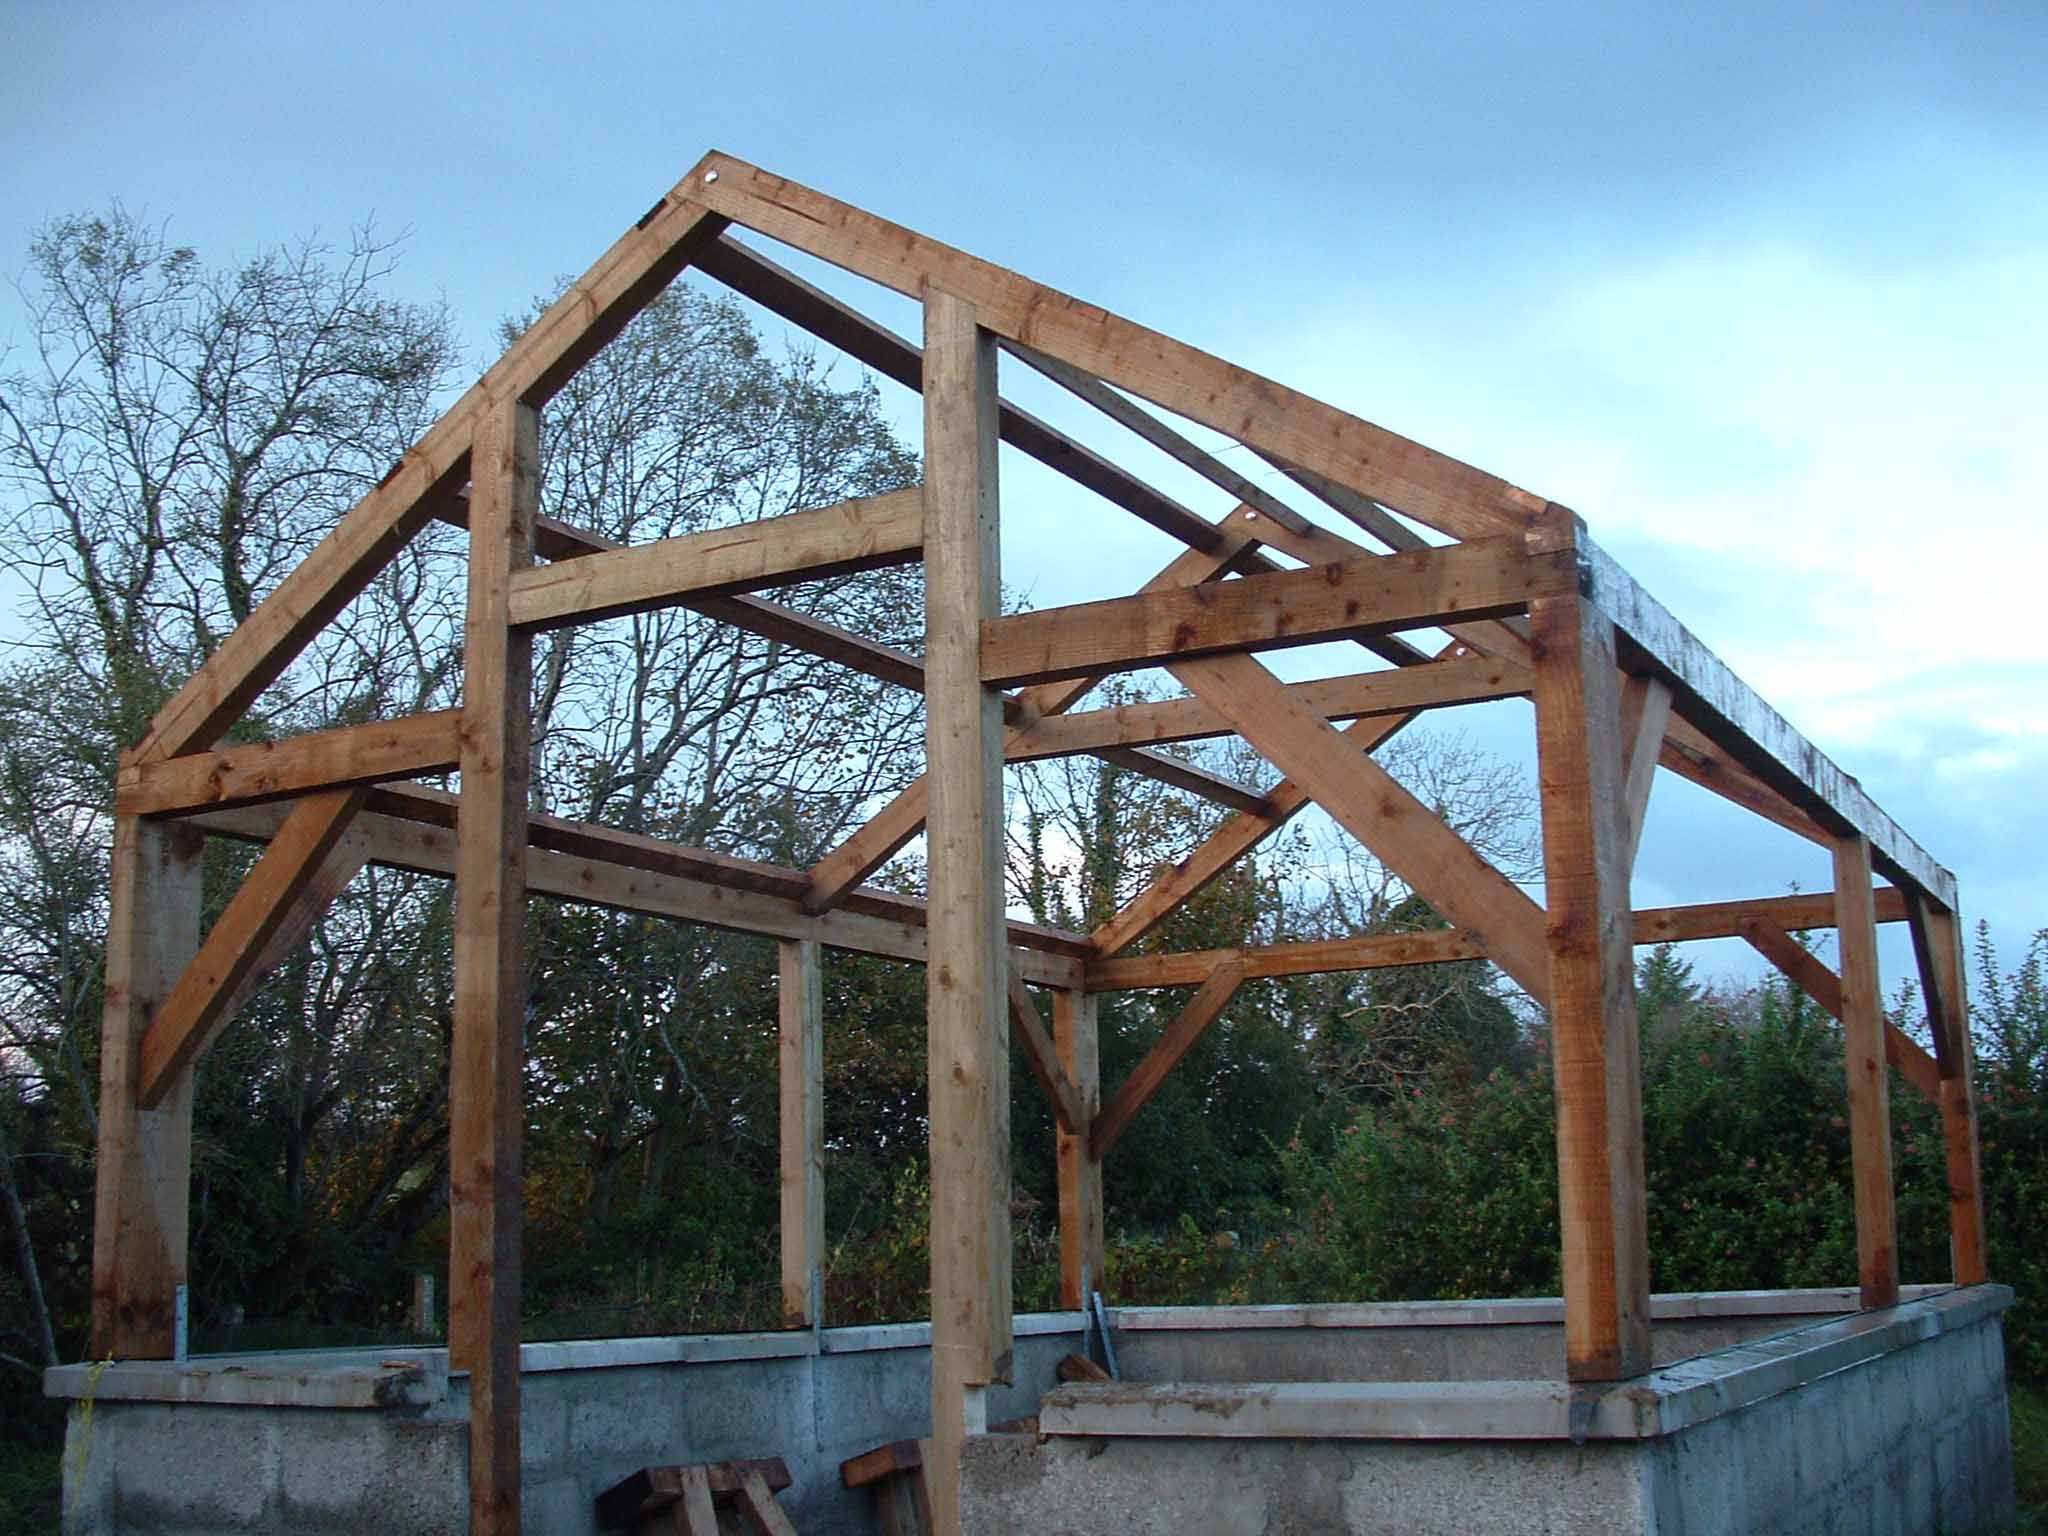  Wood  frame  lean to greenhouse  plans  Plans  DIY How to Make 